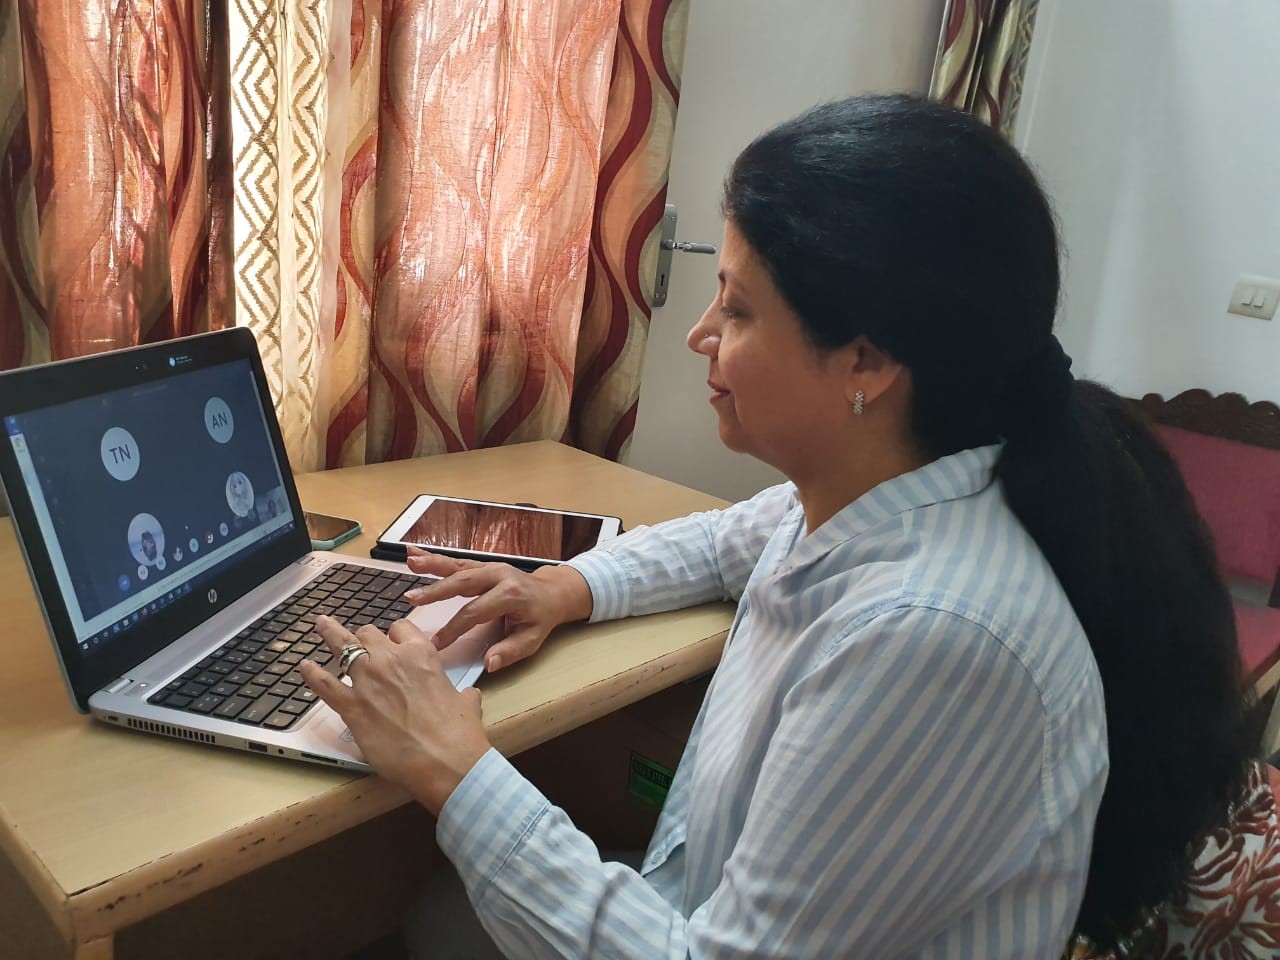 A woman works on a laptop in her home